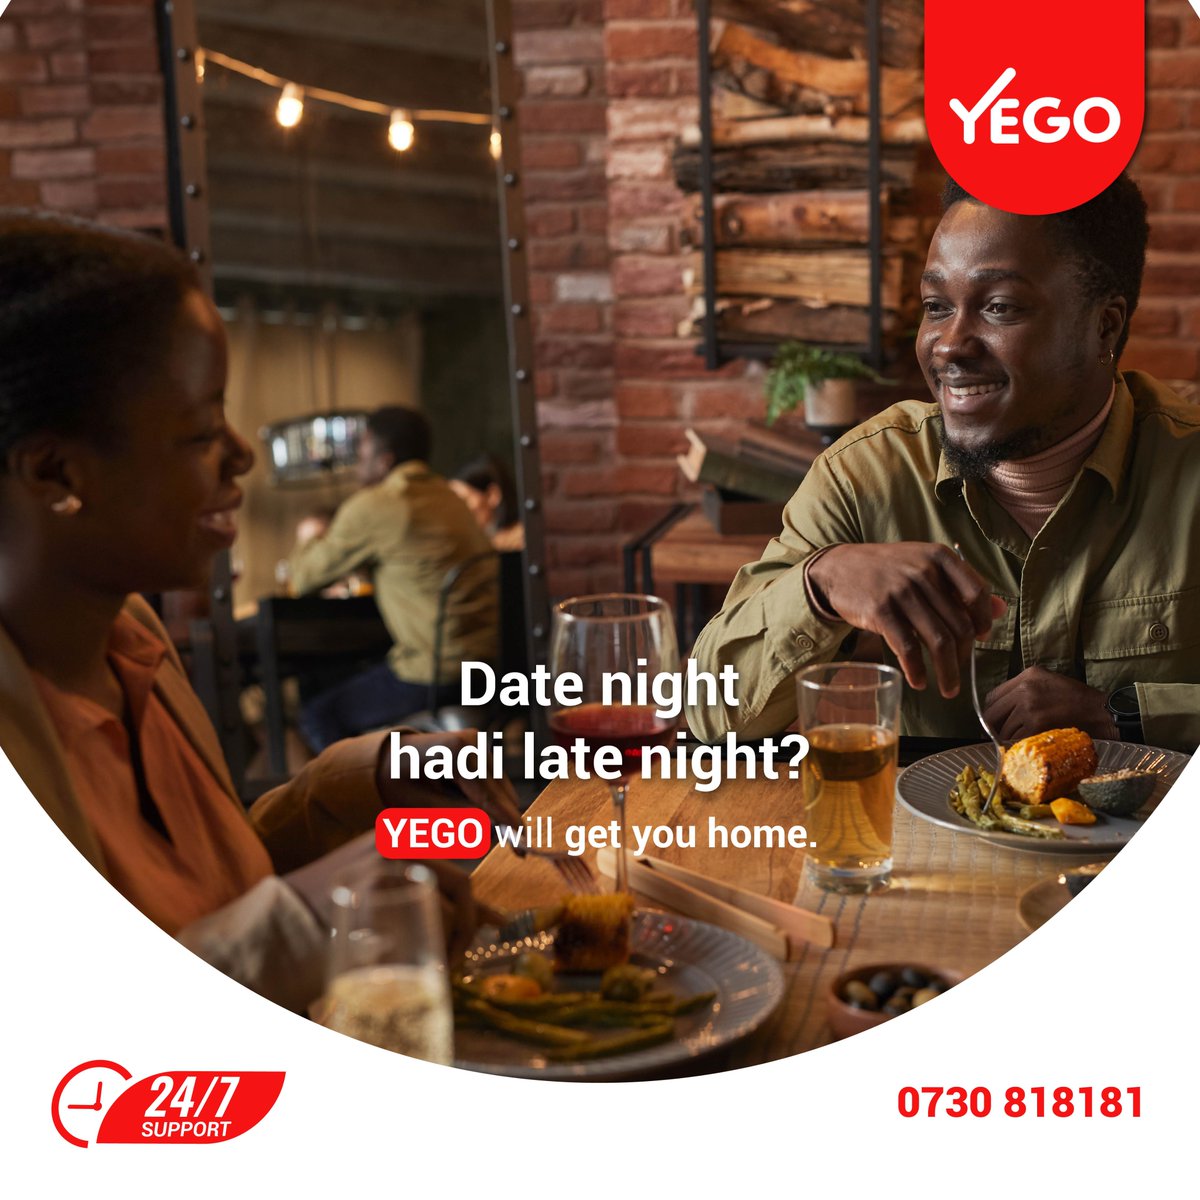 Focus on what's important and travel safe with YEGO.
Use the Yego App, Pair Ride or Call 0730818181 to Book a Taxi NOW!
#RideBetter #dontdrinkdrive #YegoKenya